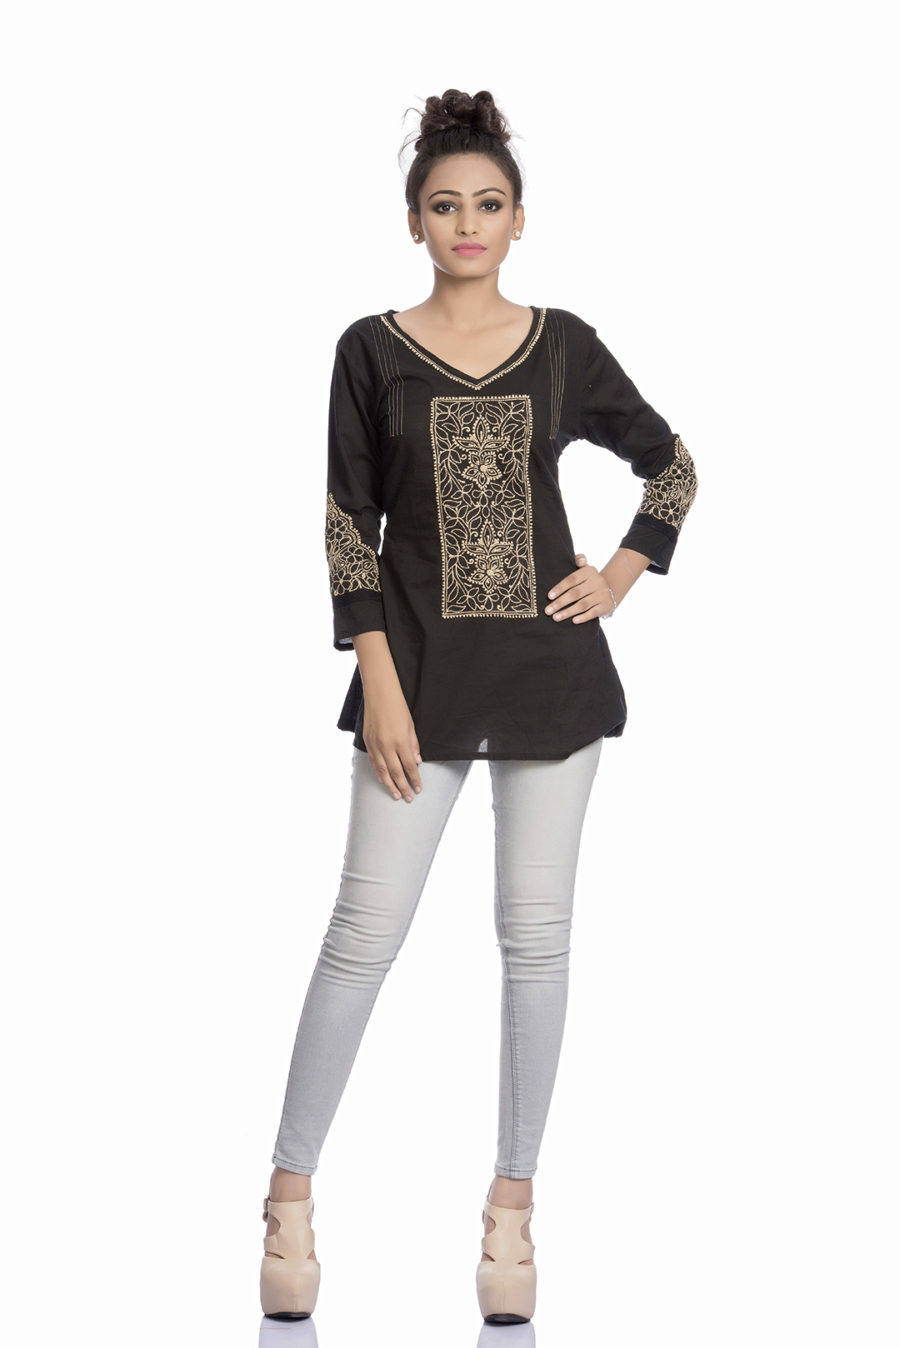 Black top with chikan embroidery.